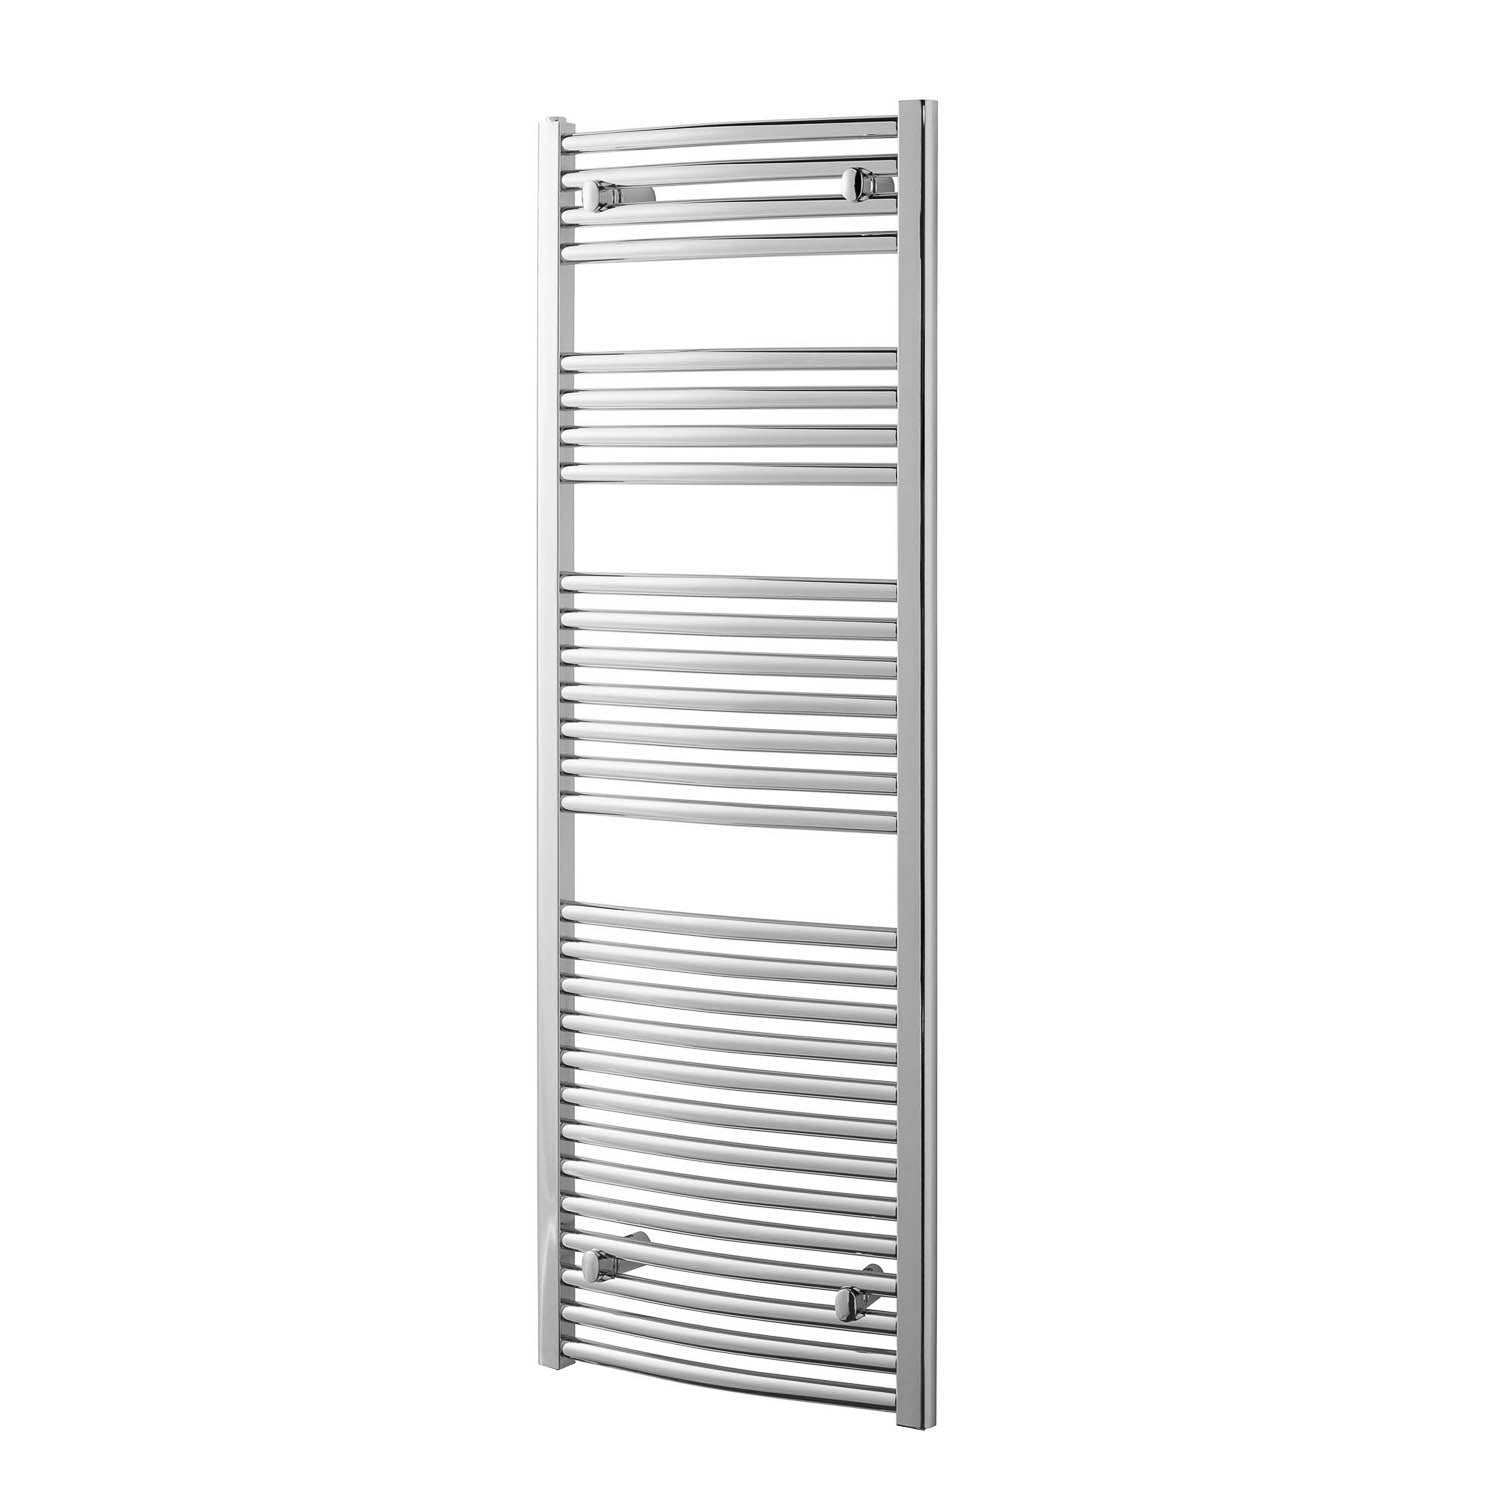 1600x500mm Modale Anti-Scald Towel Rail with a chrome finish on a white background